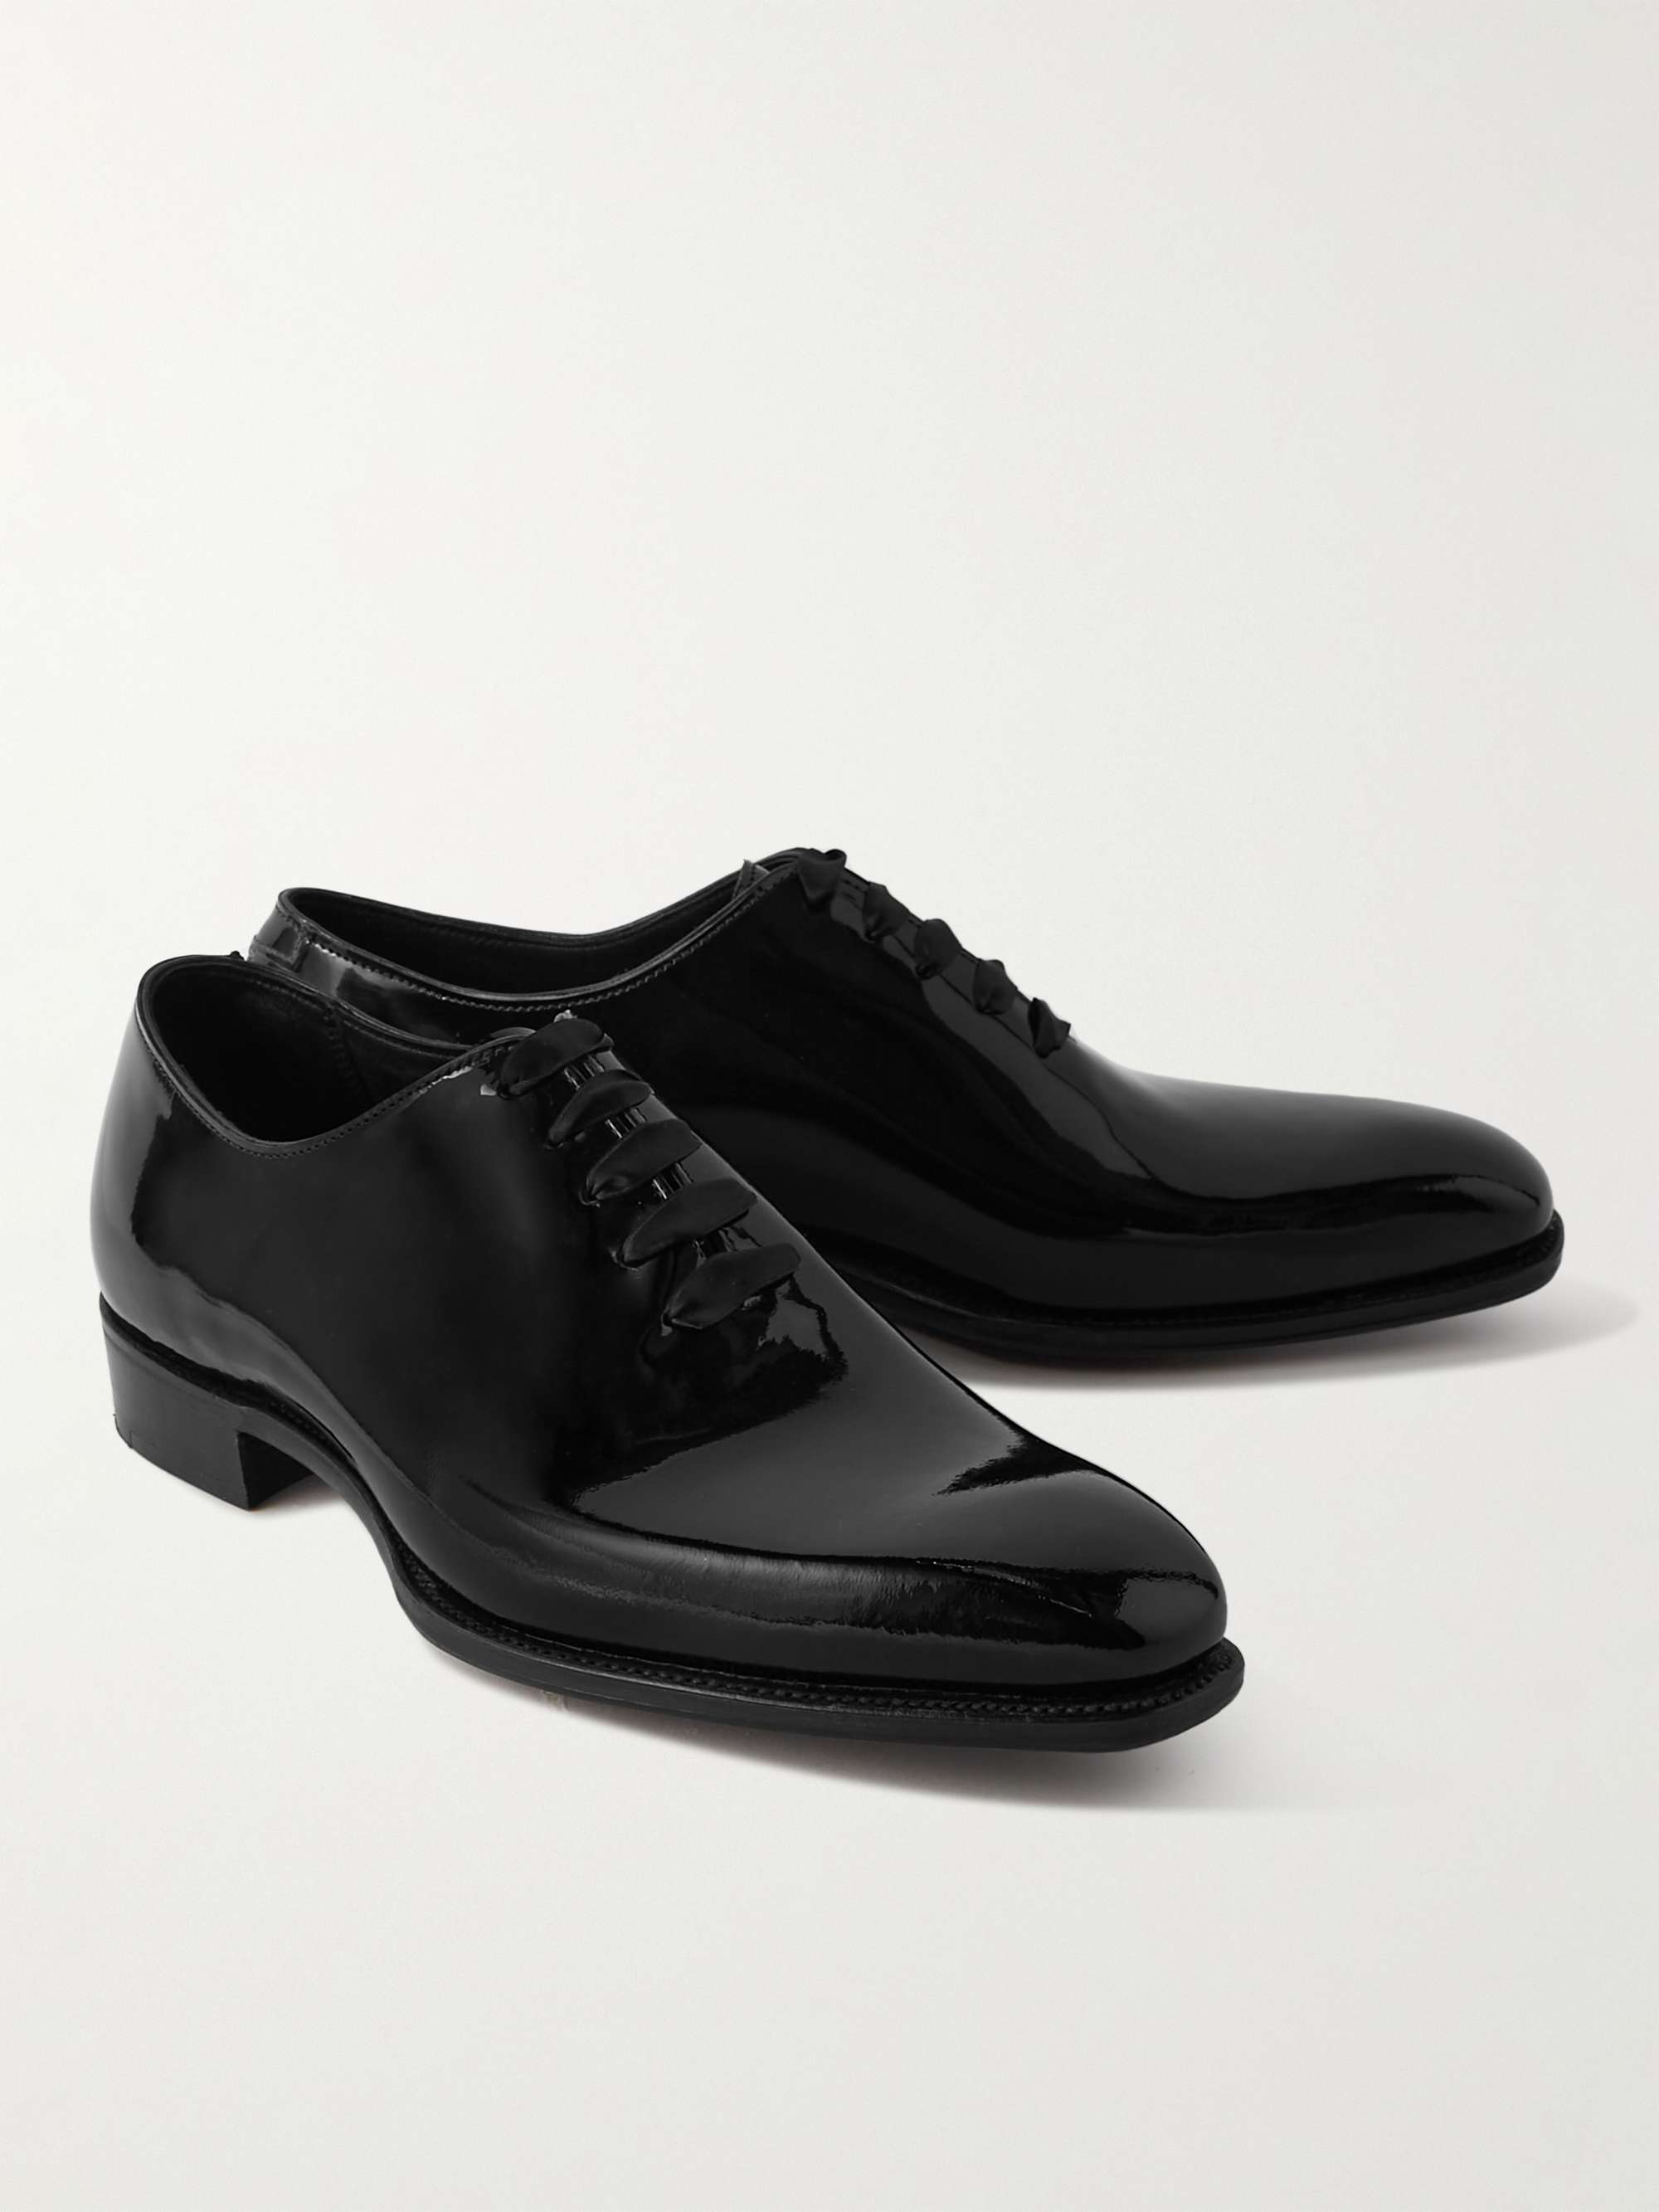 GEORGE CLEVERLEY Merlin Whole-Cut Patent-Leather Oxford Shoes